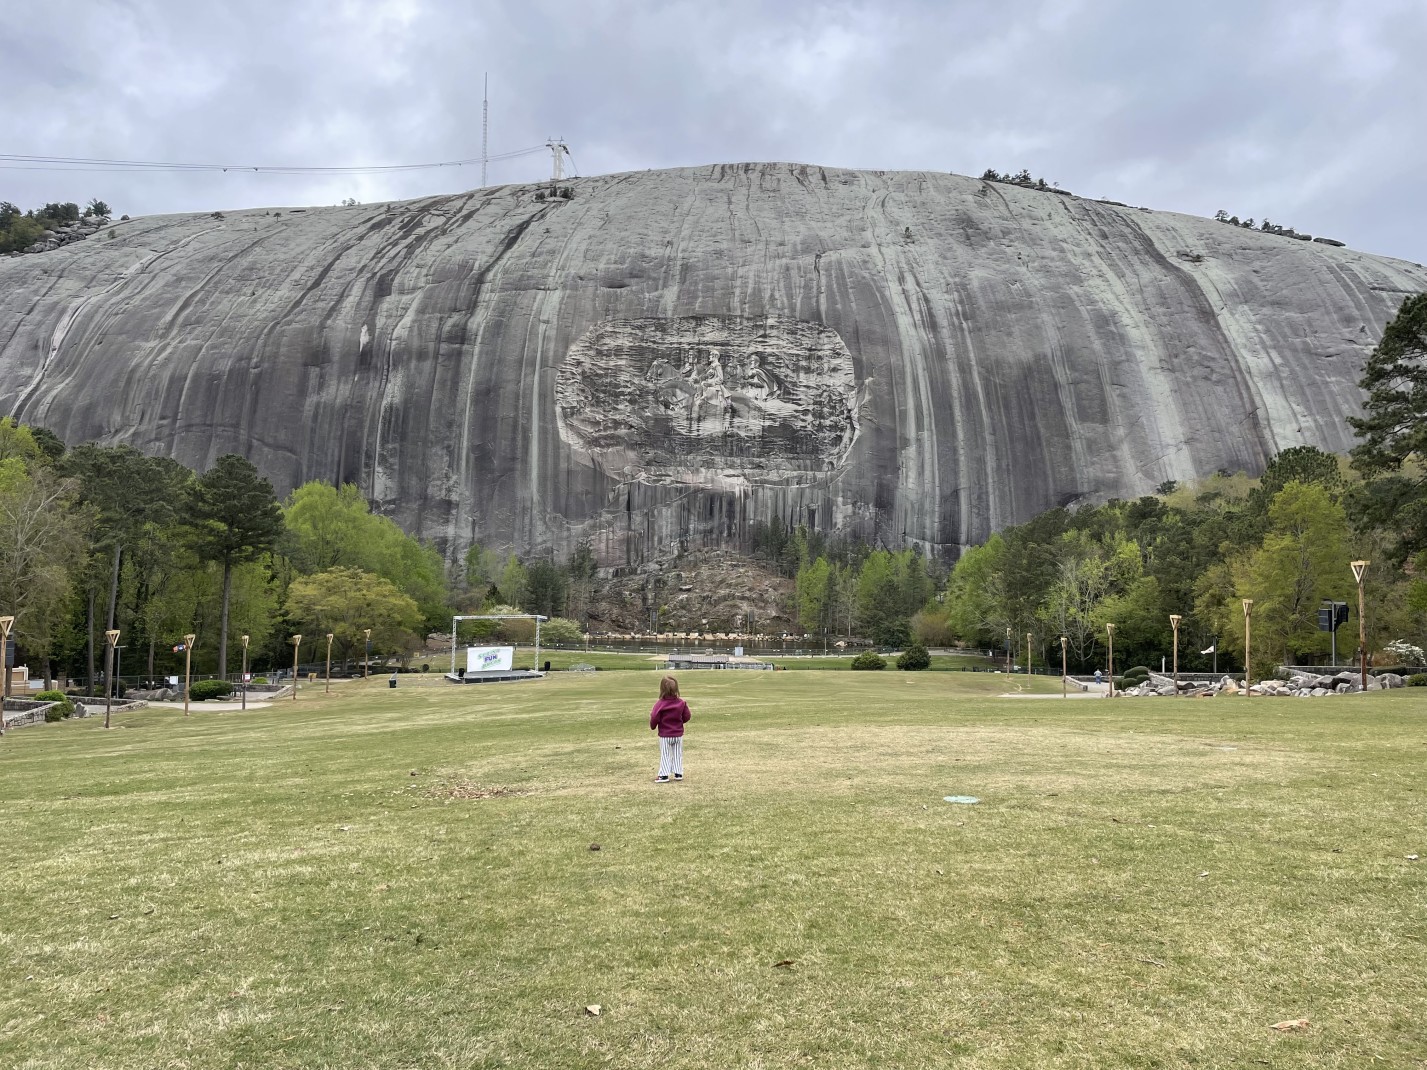 Grey Stone Mountain in Atlanta, Georgia with a child in red standing on green grass.